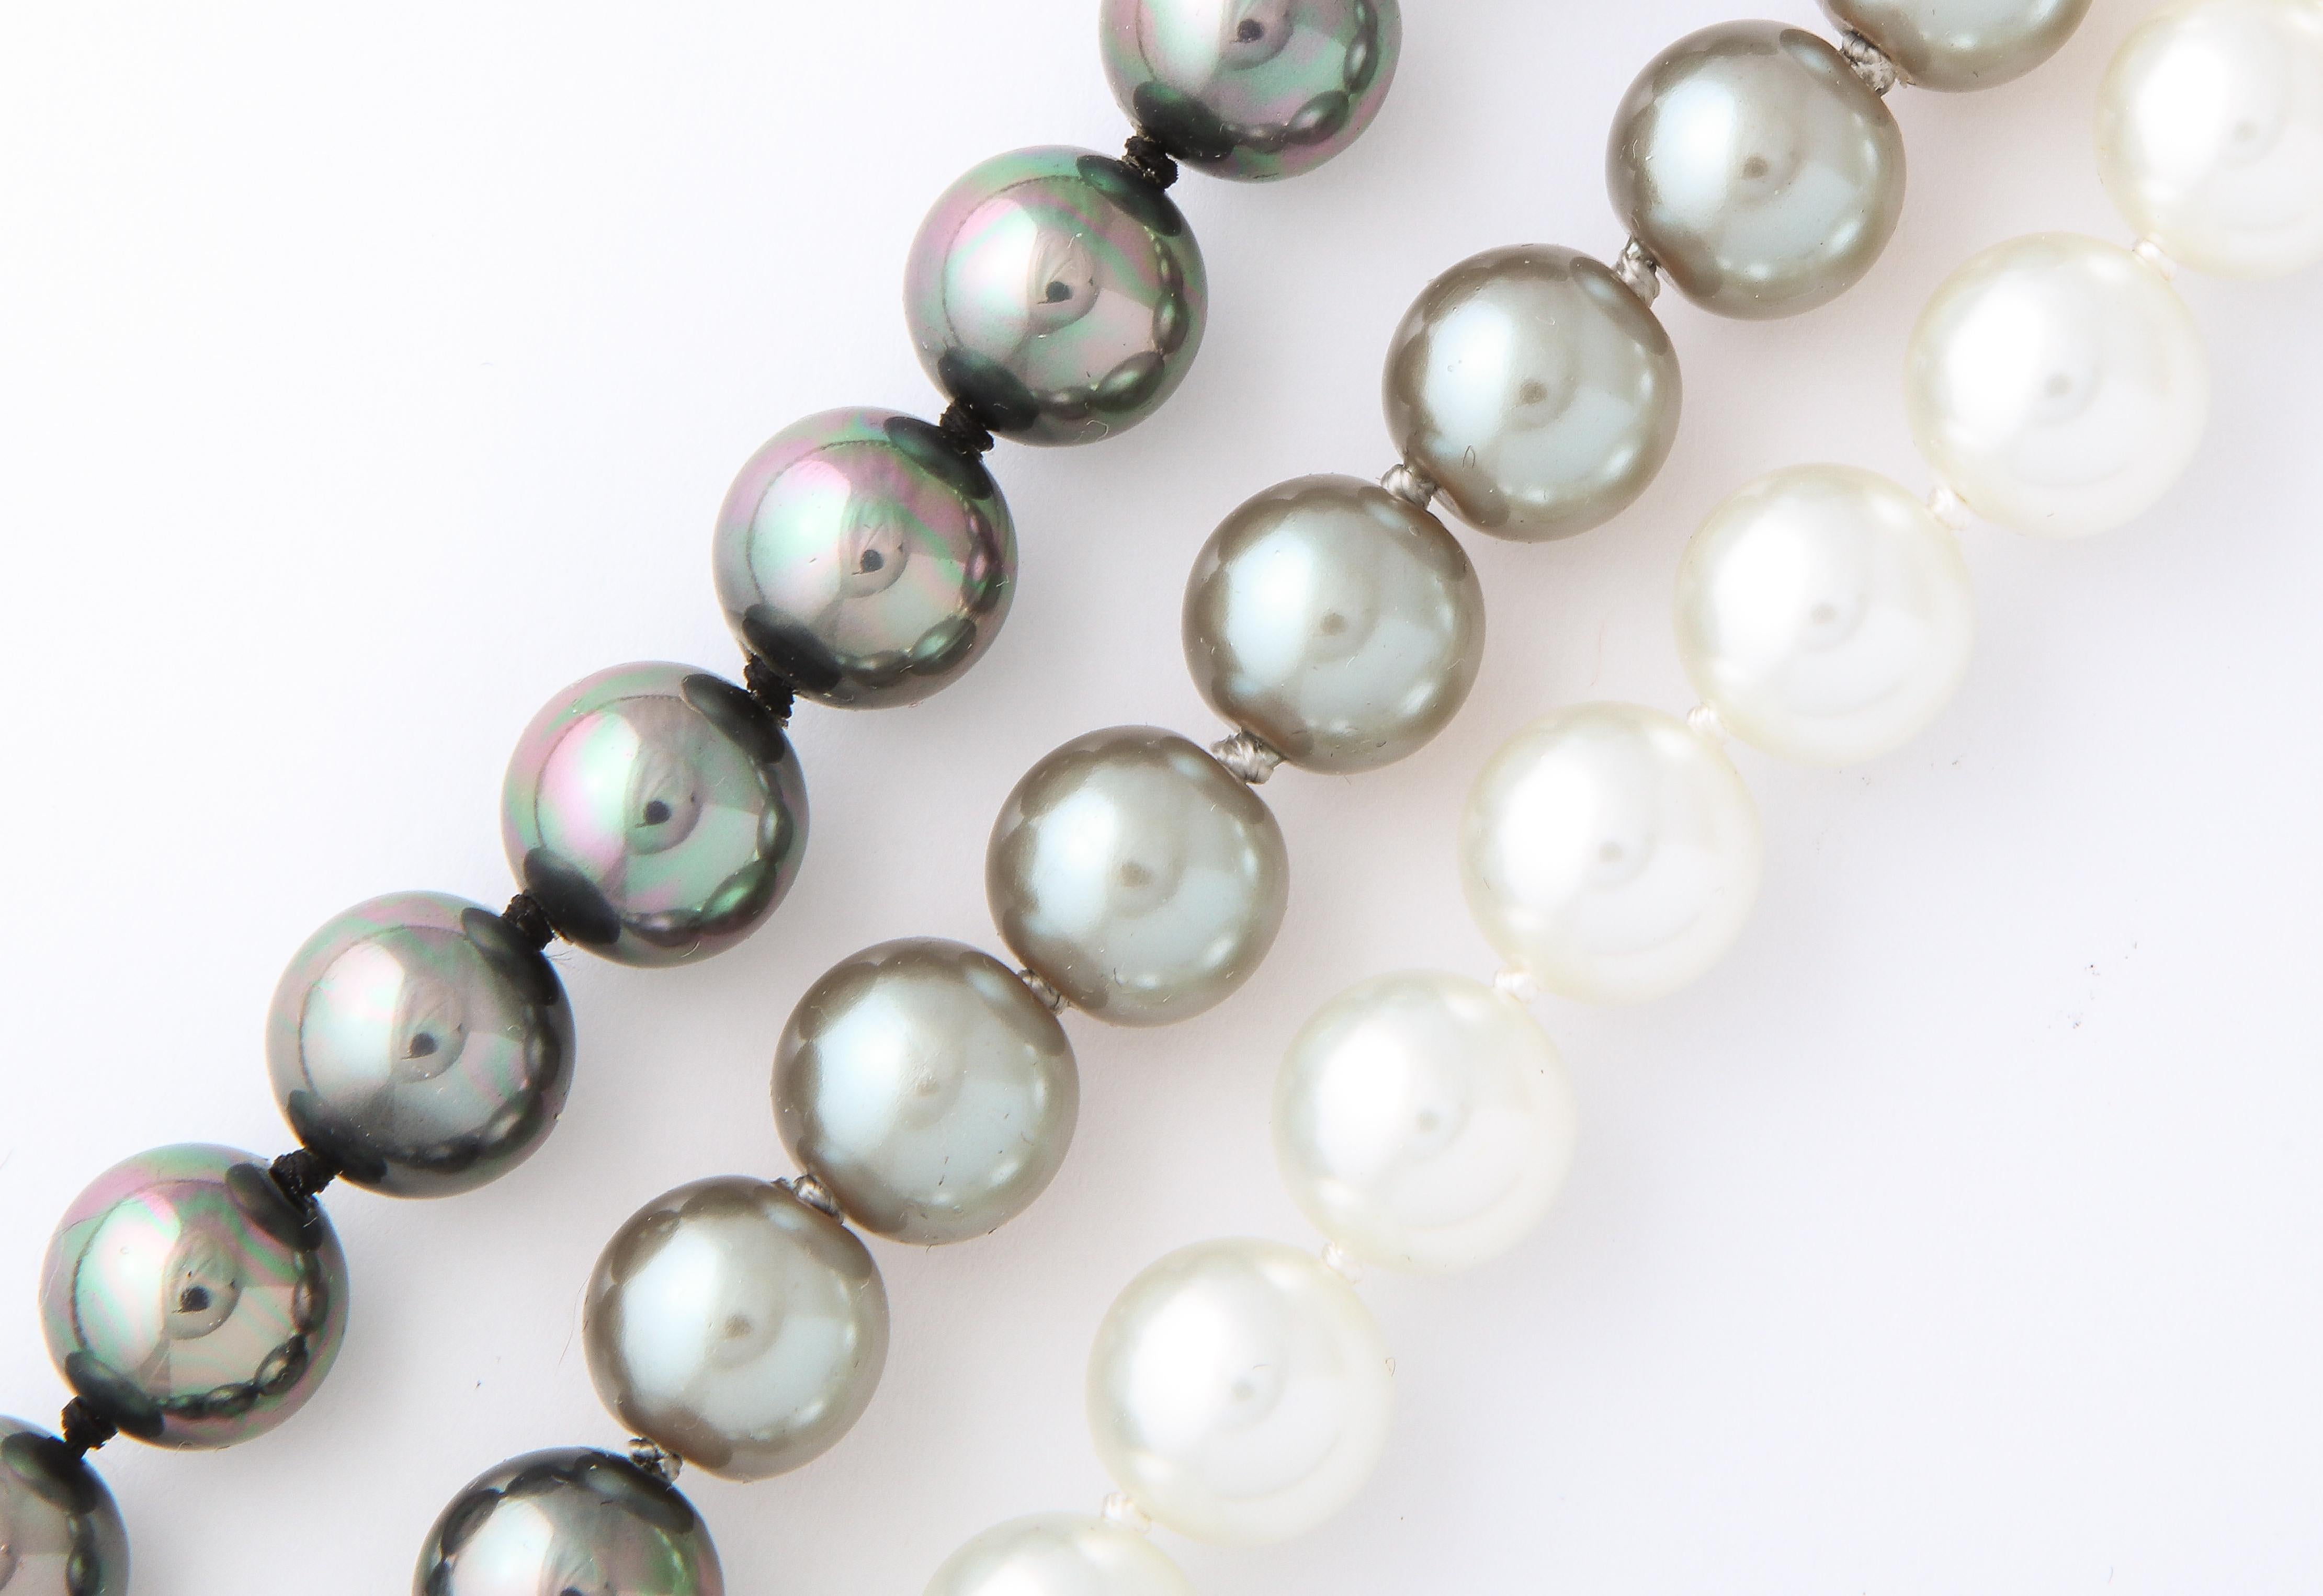  Shaded South Sea Manmade Pearls  Separable Three Necklaces Mikimoto Style 1